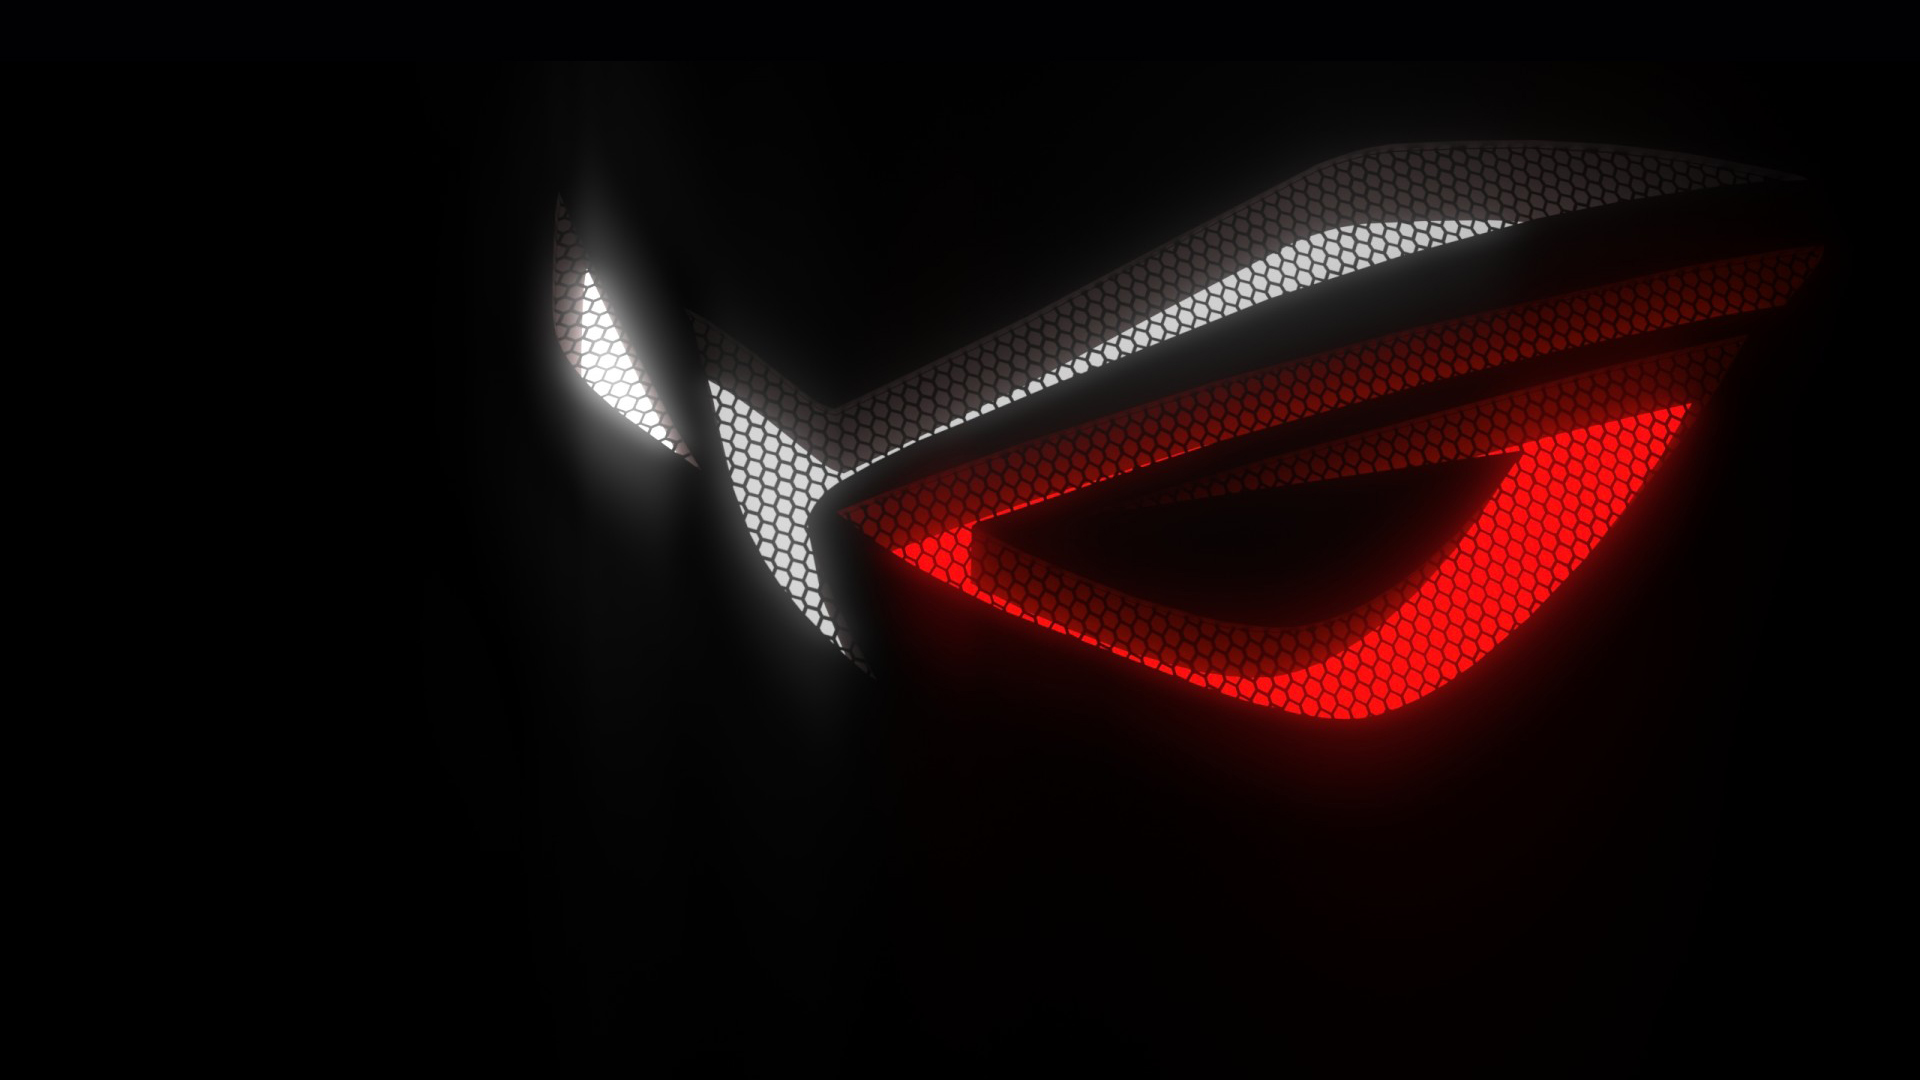 asus rog republic of gamers logo hex background hd 1920x1080 1080p